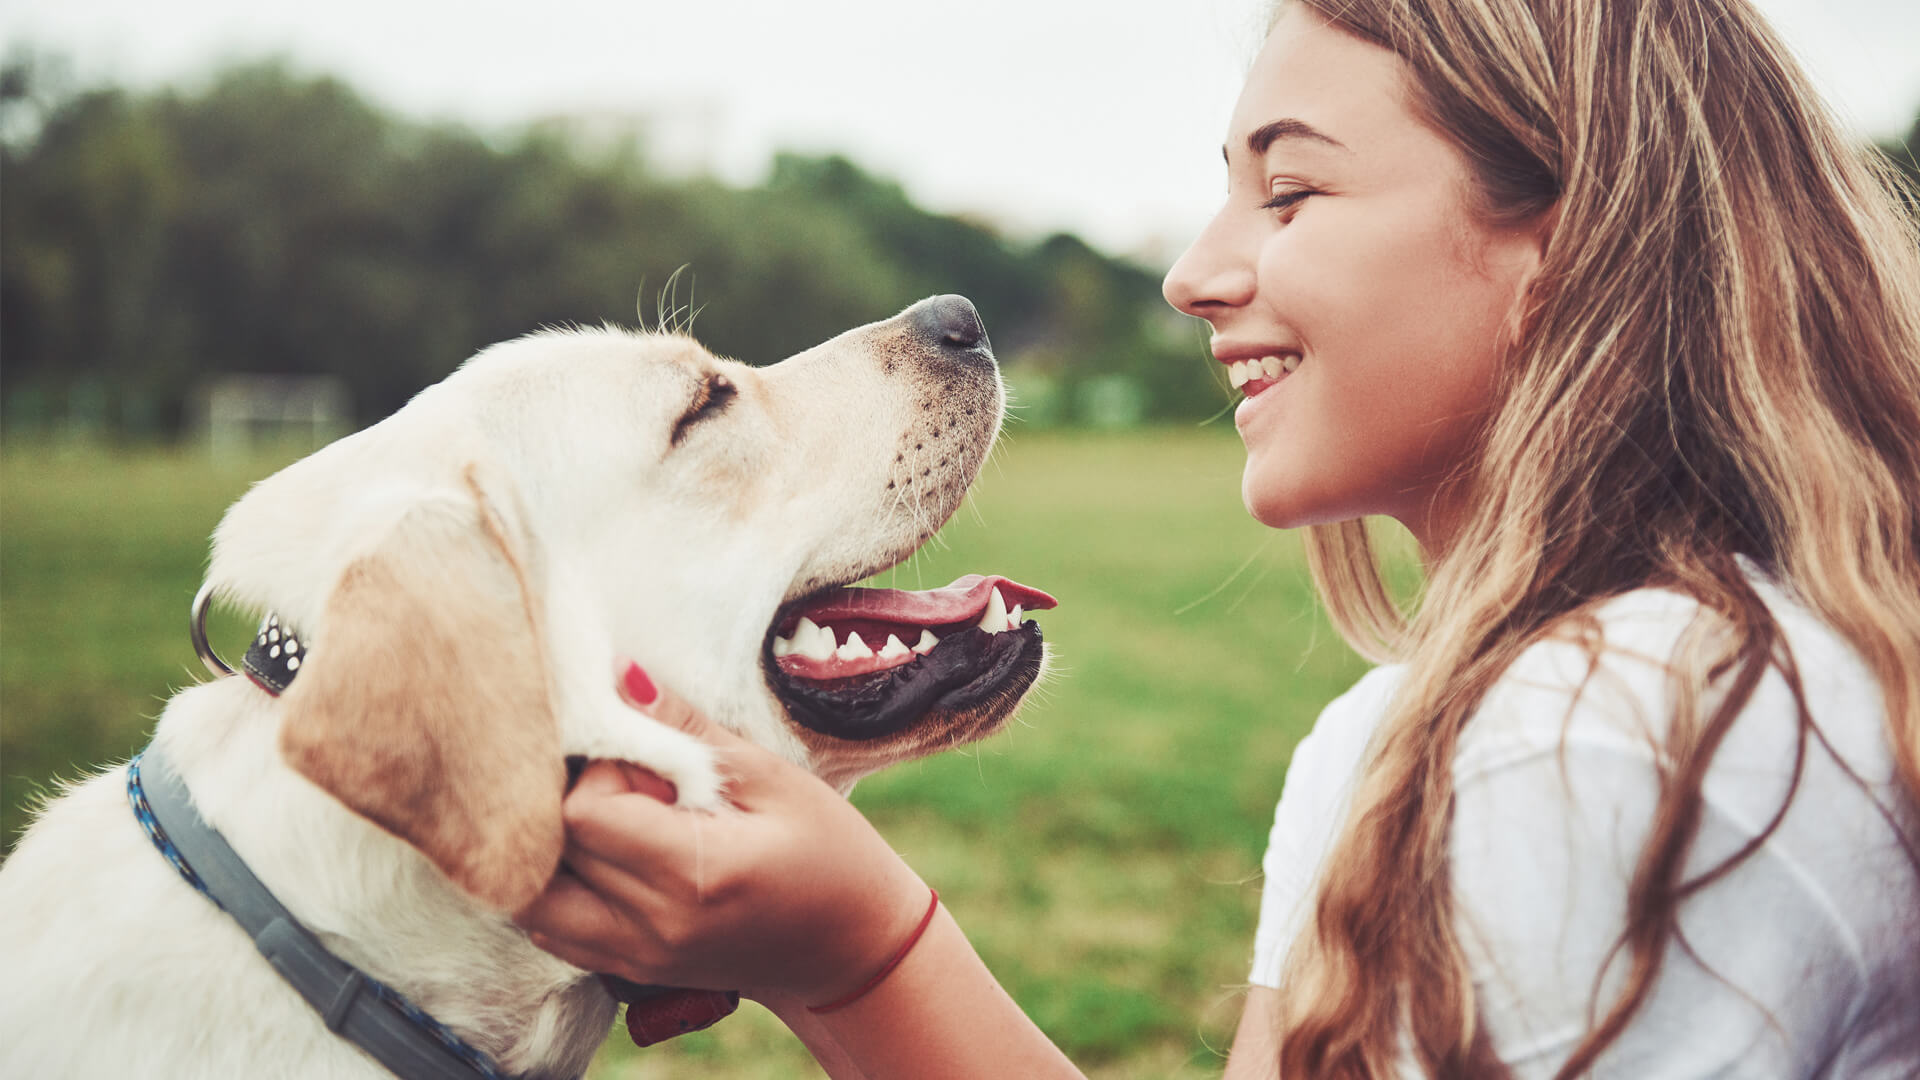 Man's best friend: how we can now do more with our pets - Lux Magazine